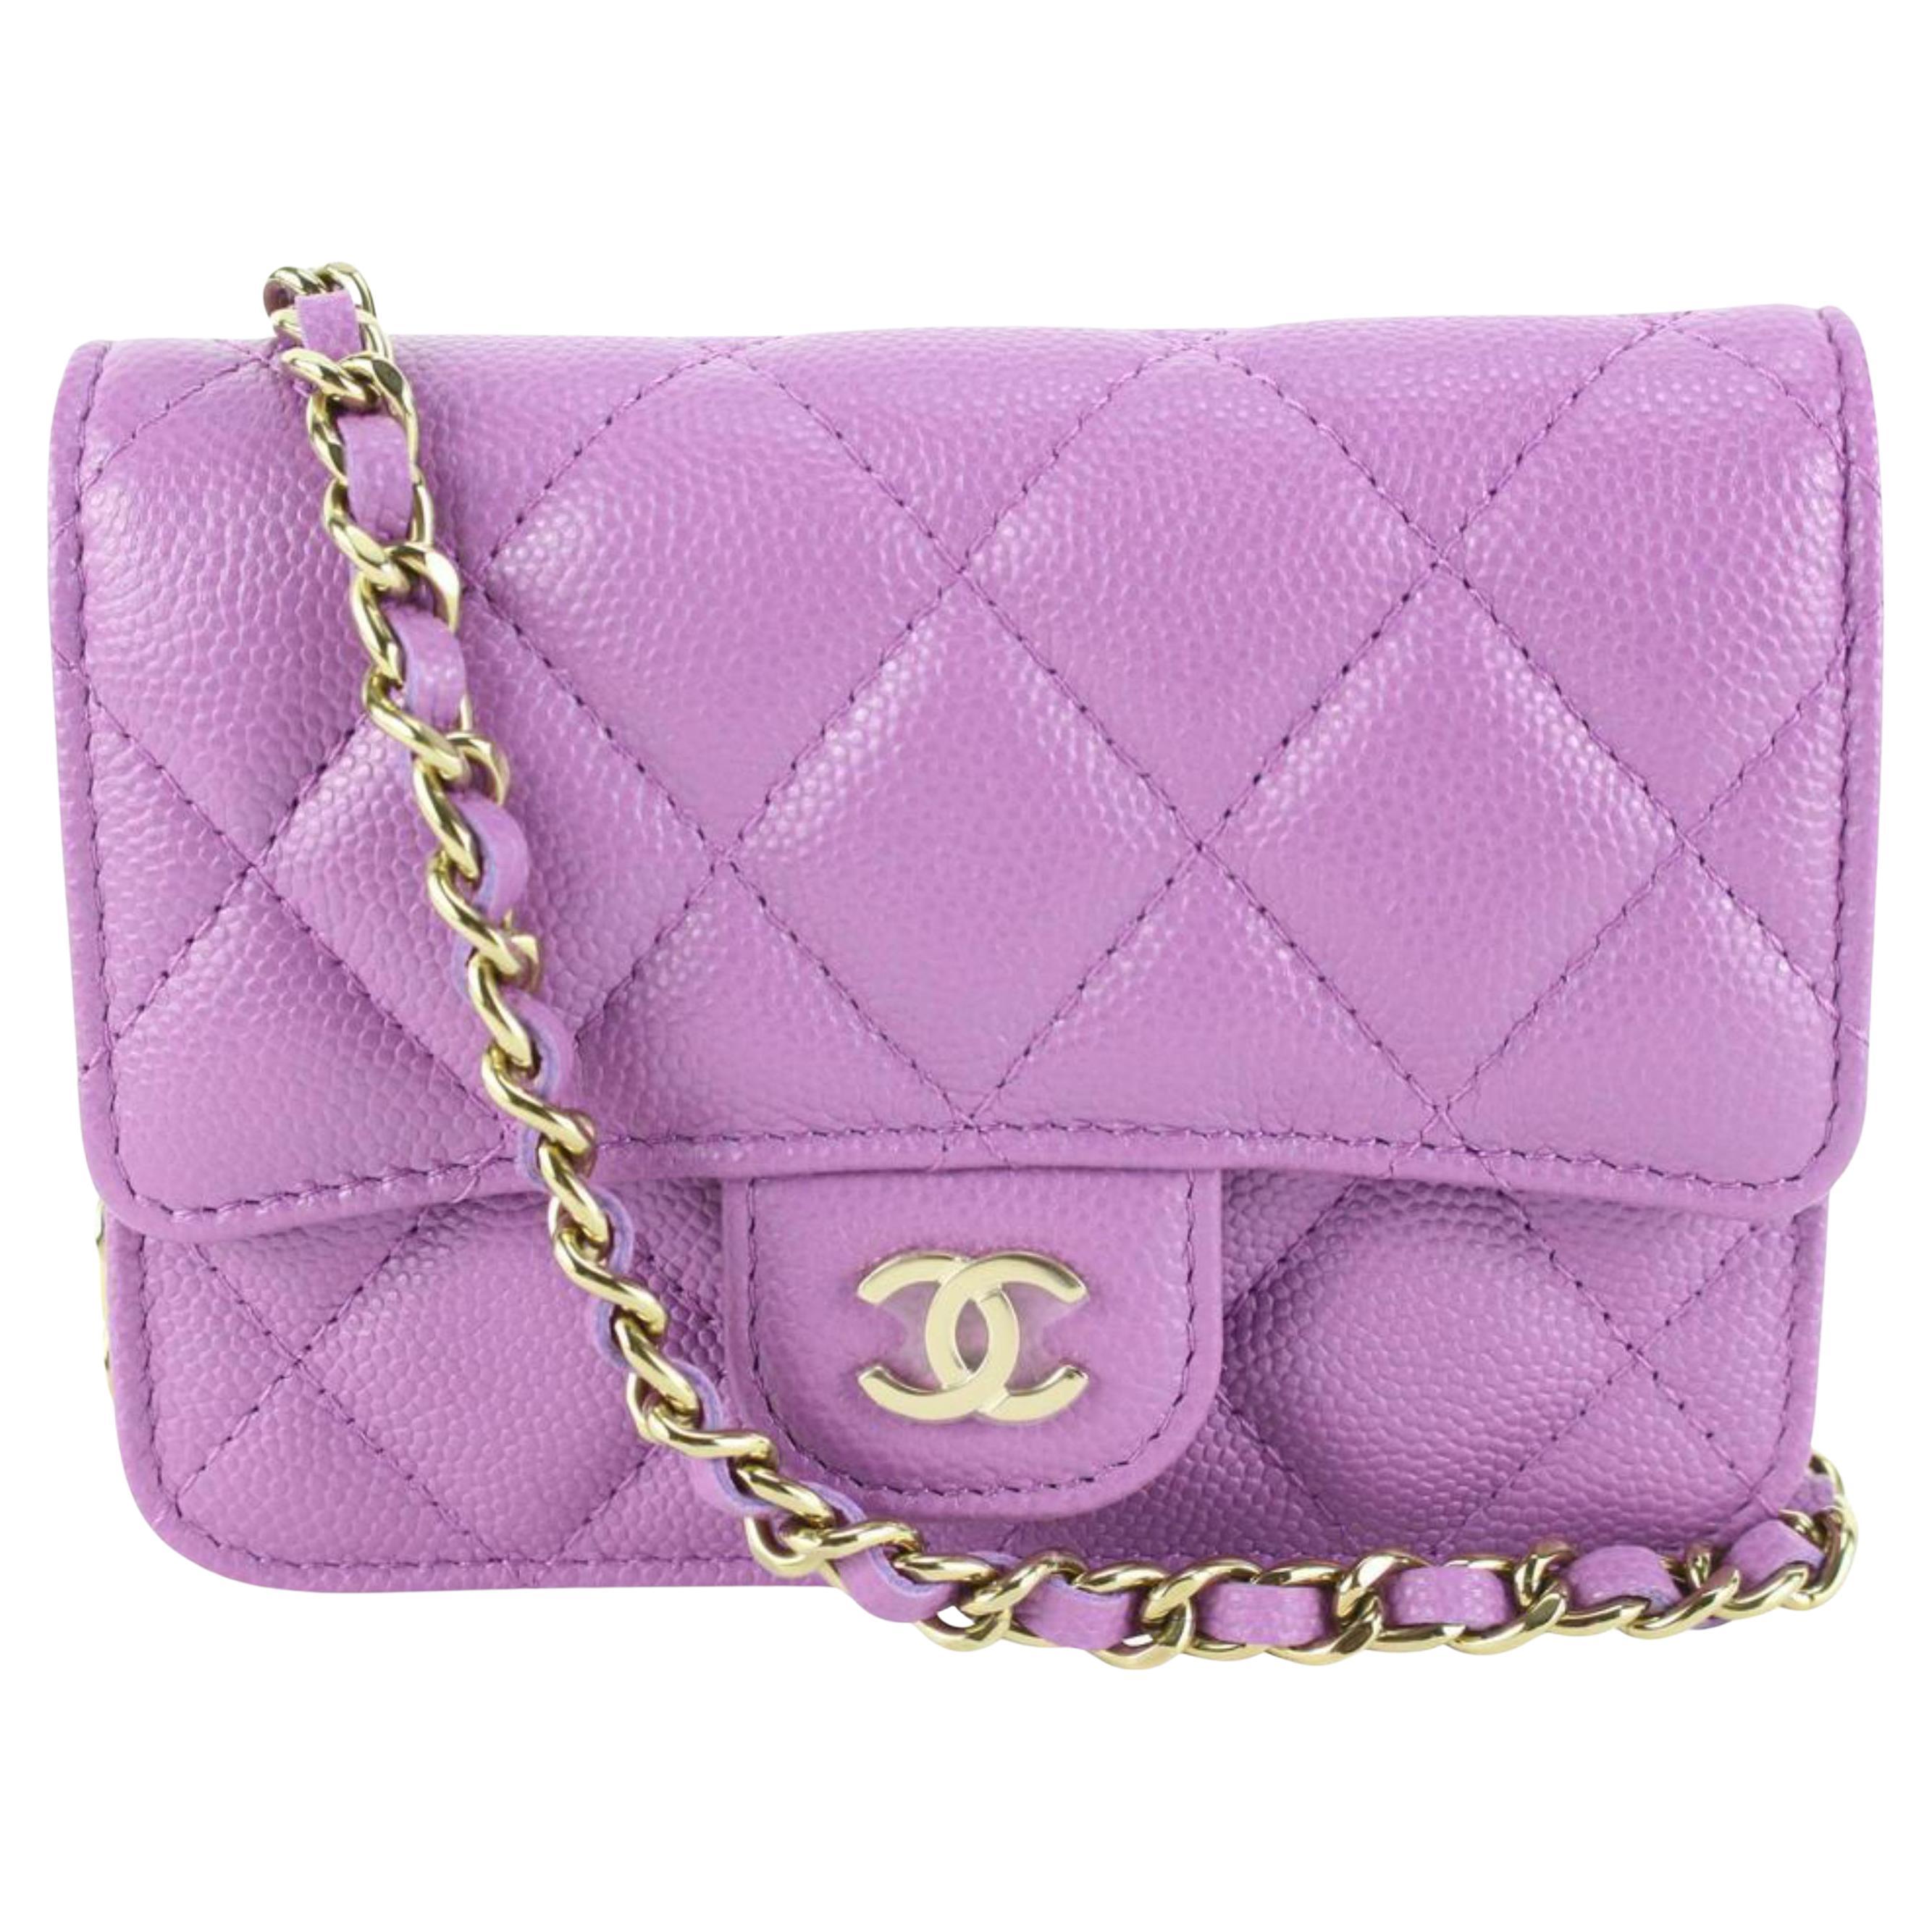 CHANEL Denim Quilted Chanel 19 Wallet On Chain WOC Blue 607854